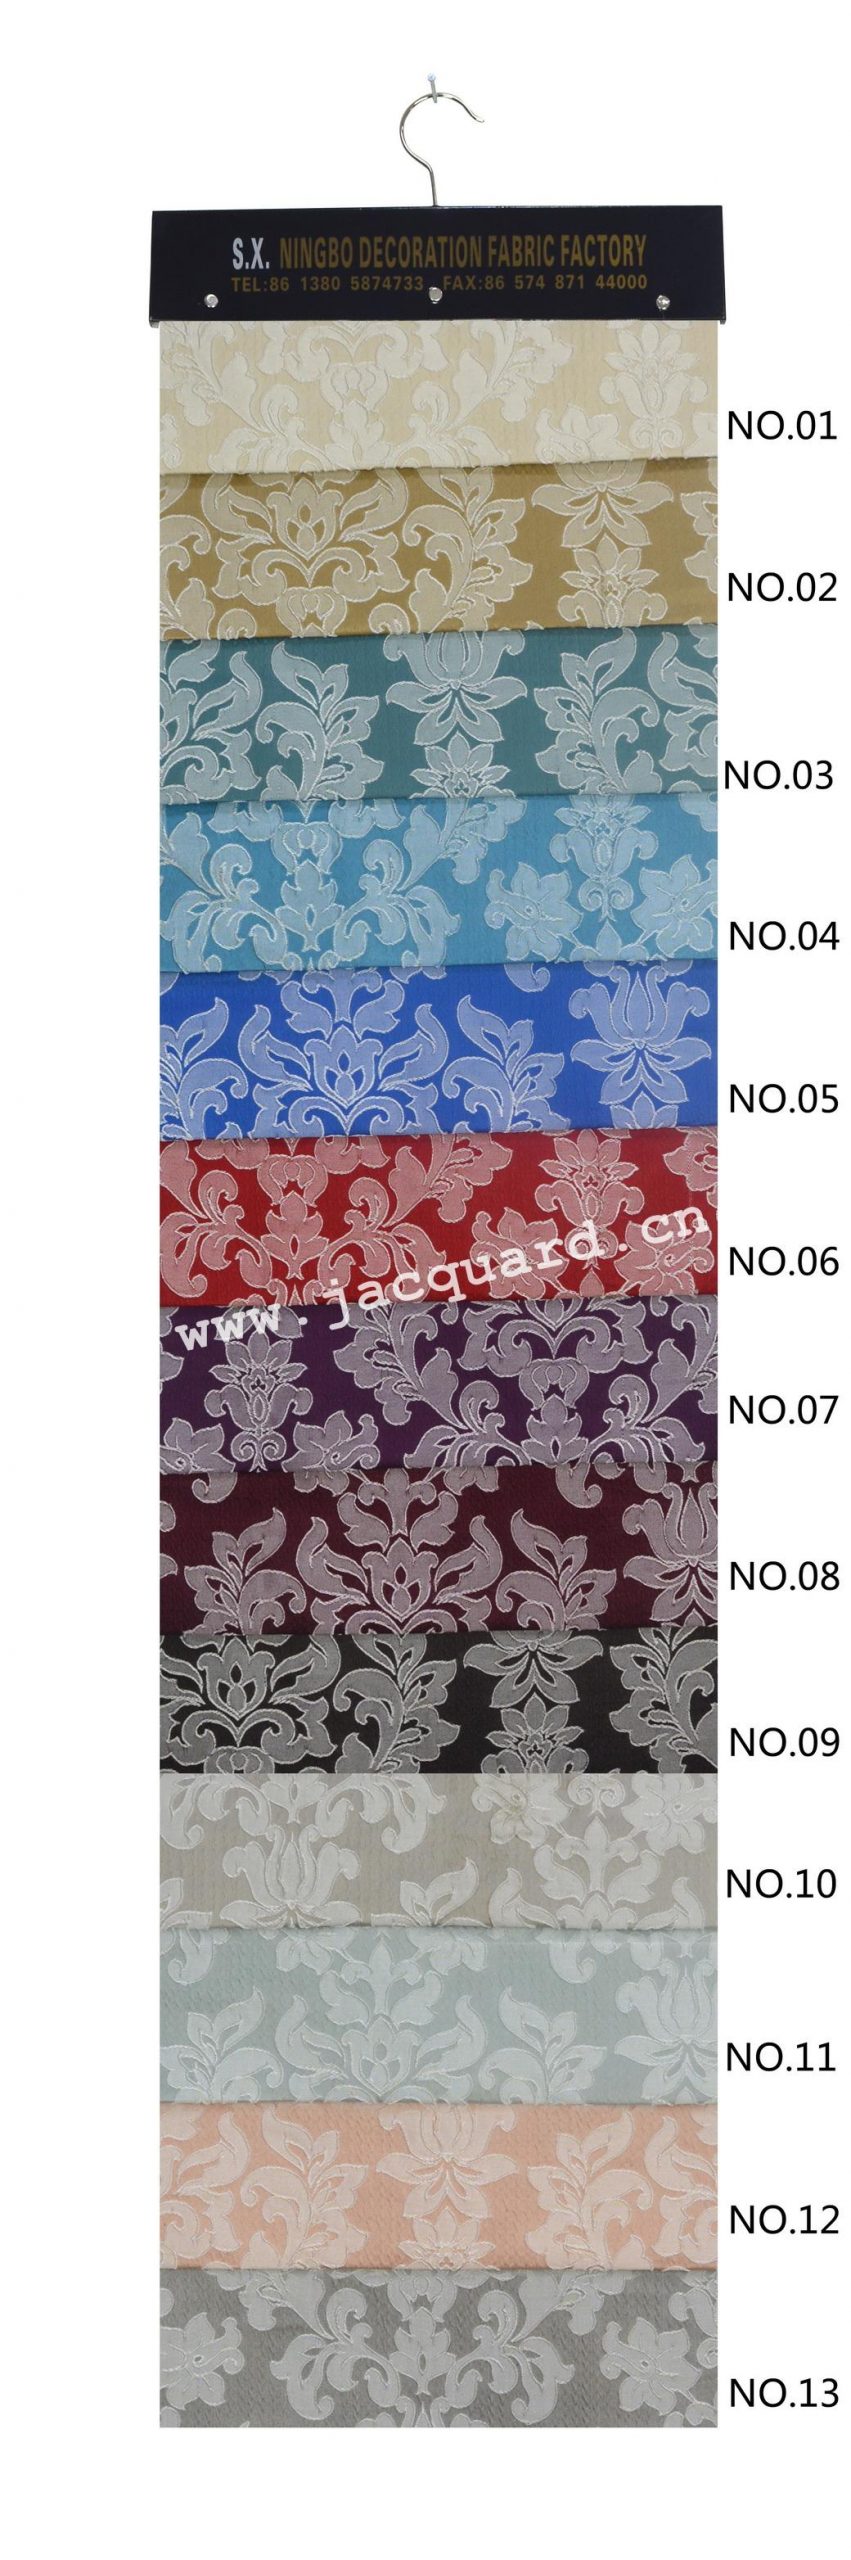 European style Jacquard Grommet Curtain for Bed Room Living Room(2 panels)